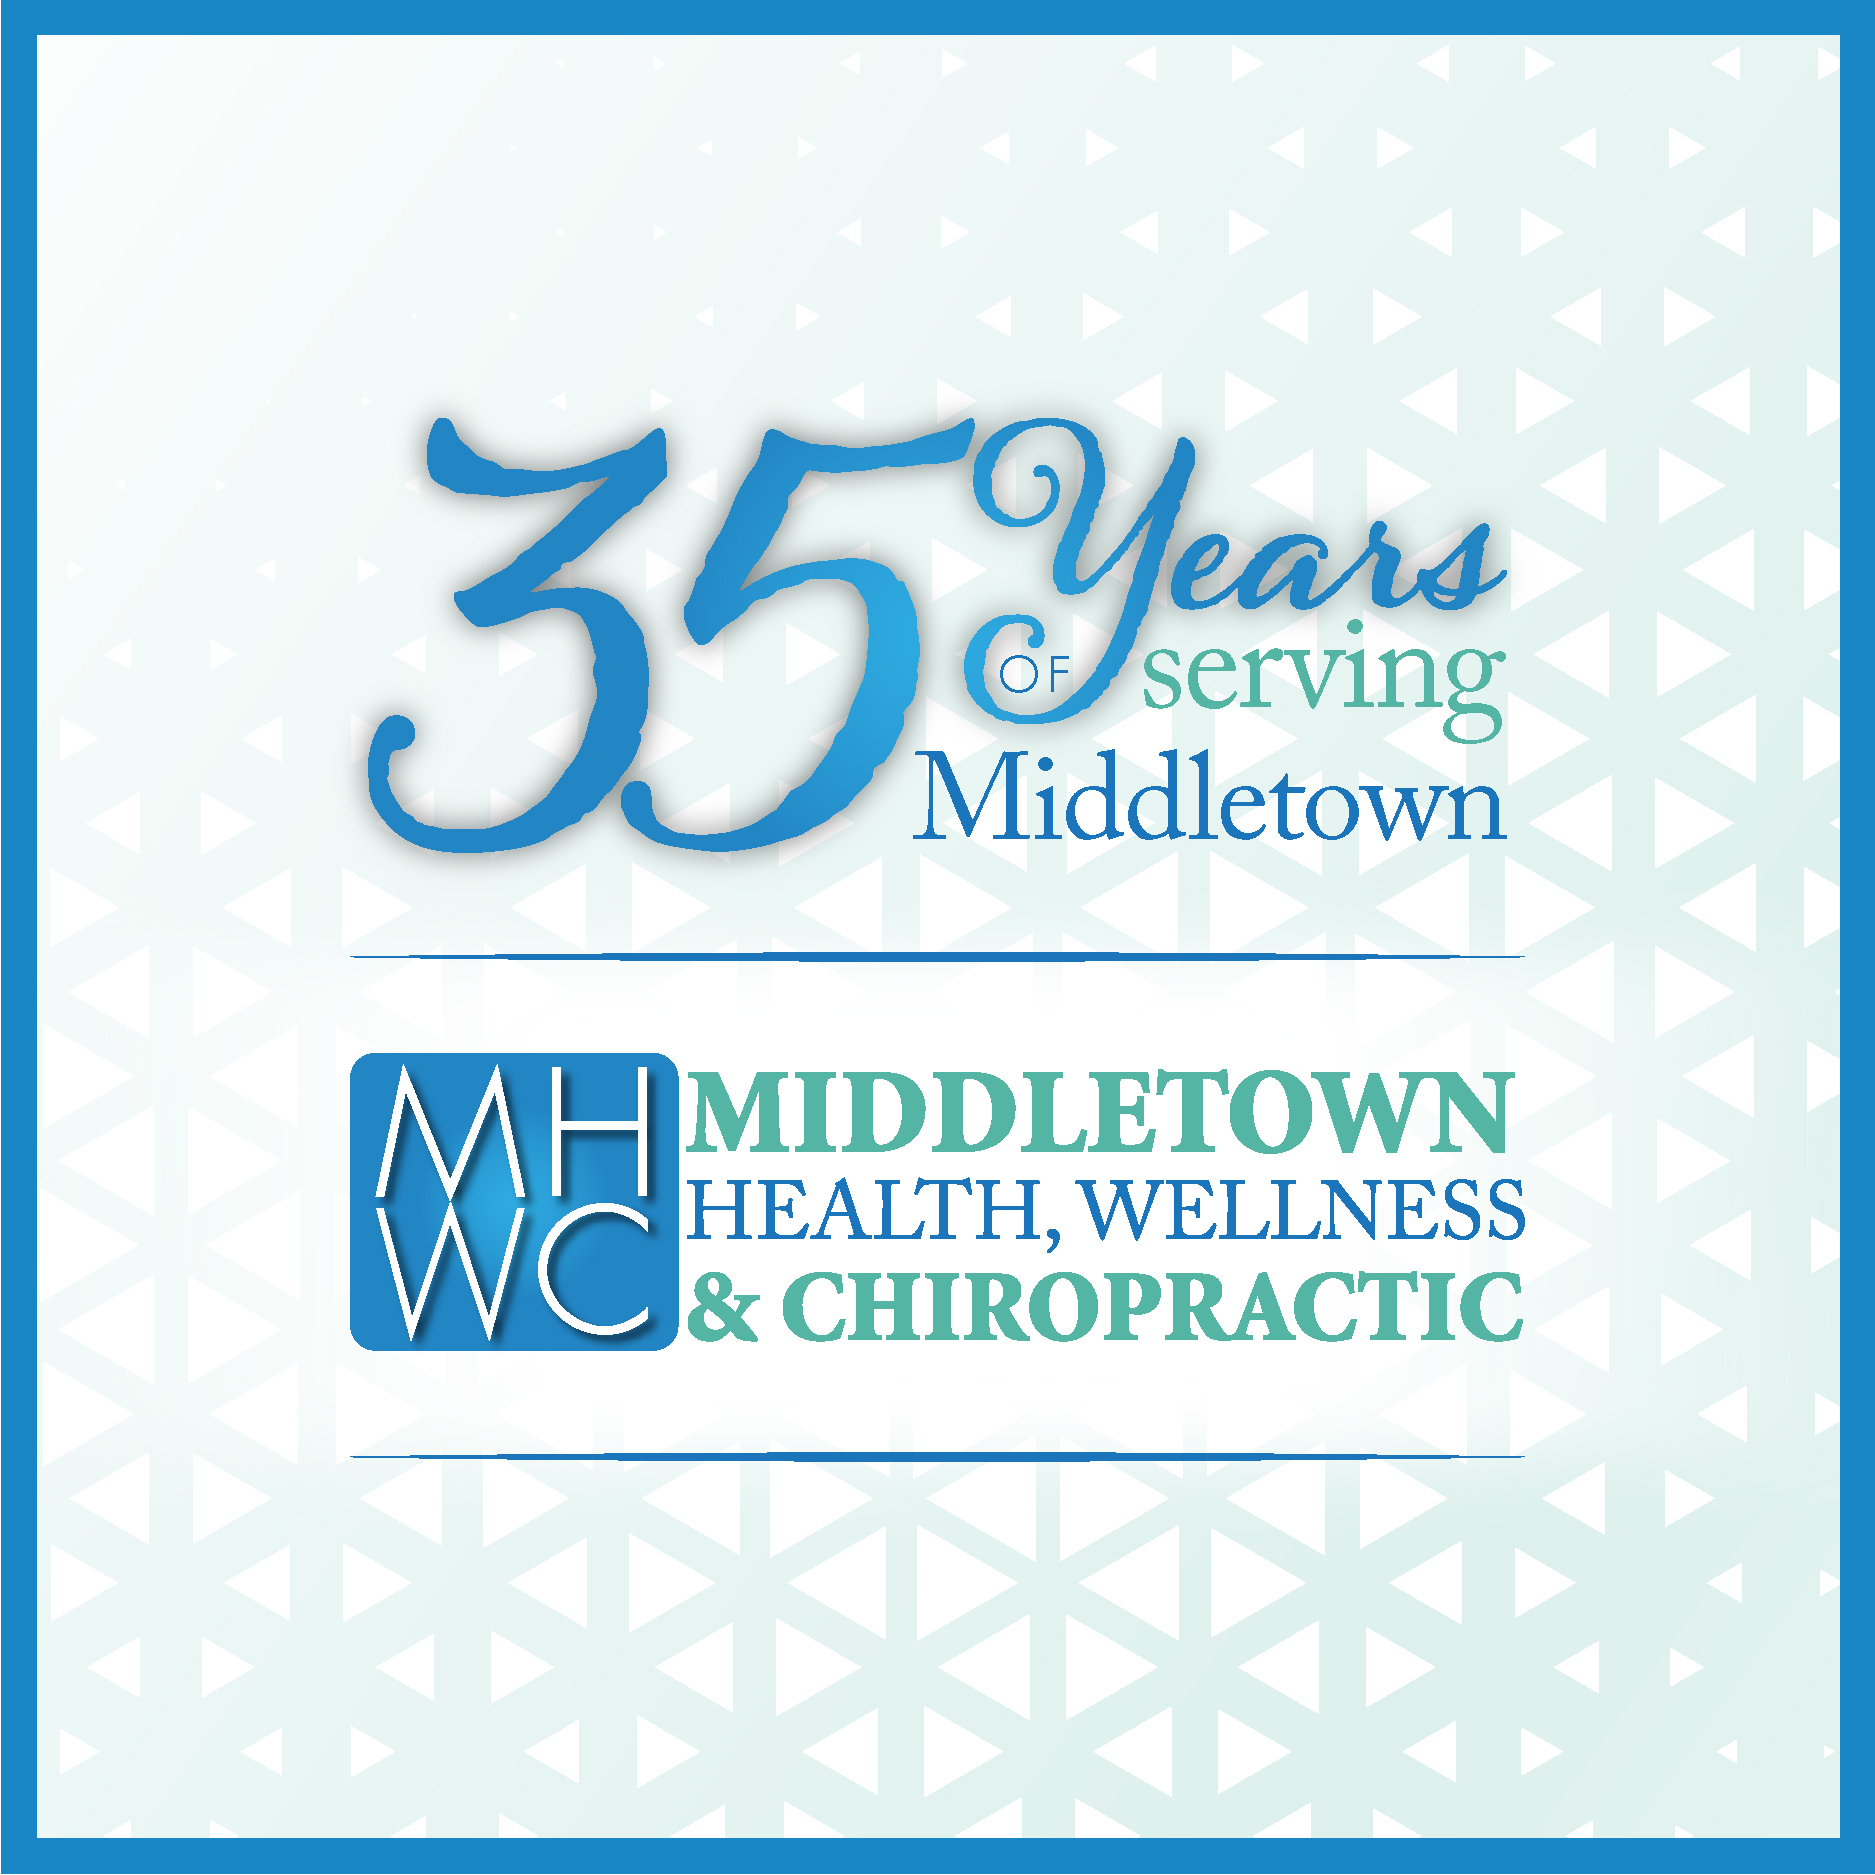 Blog - Page 2 of 10 - Middletown Health & Wellness Center